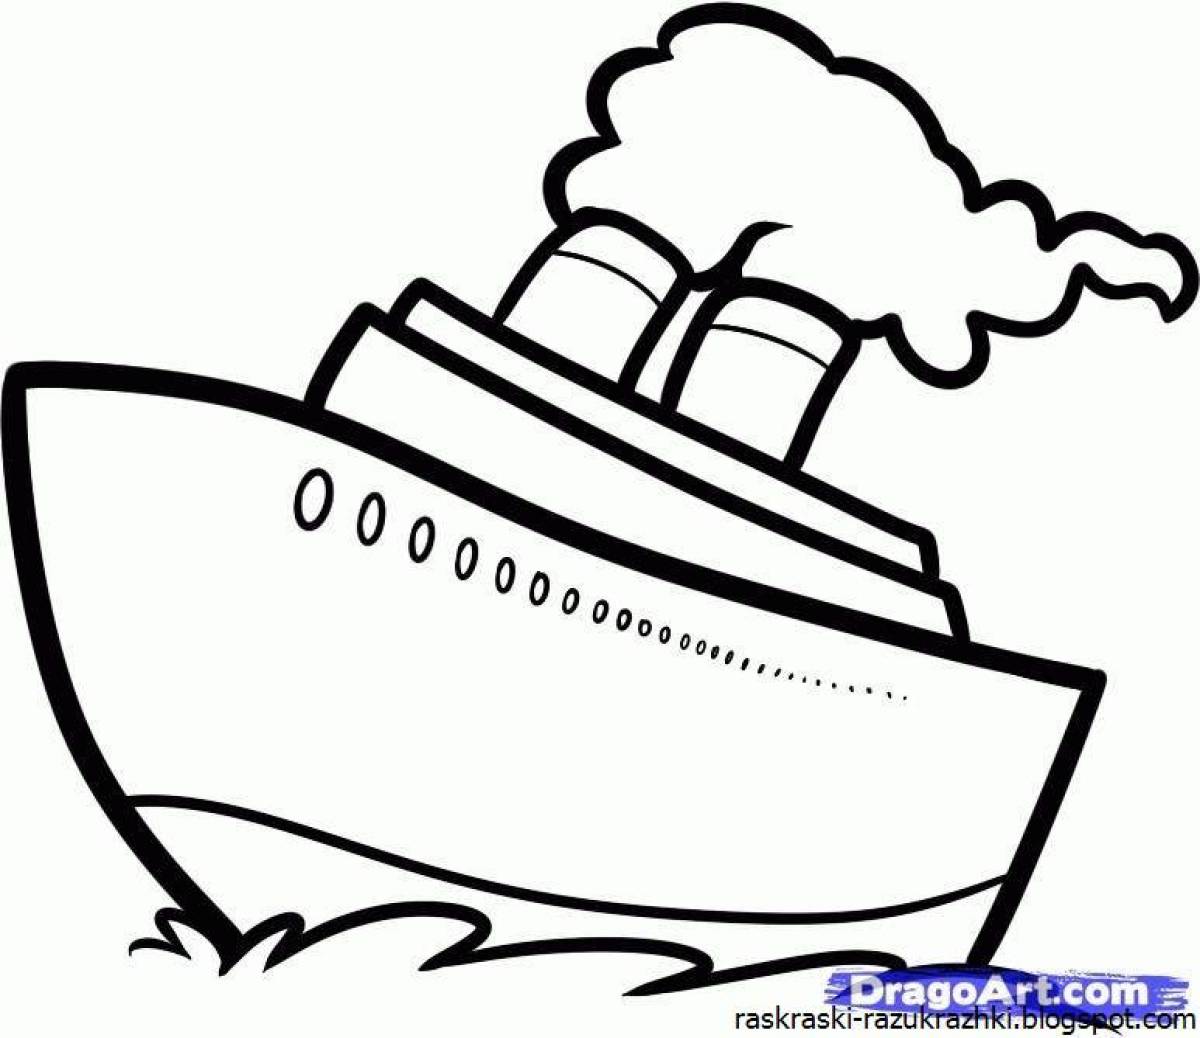 Luxury boat coloring page